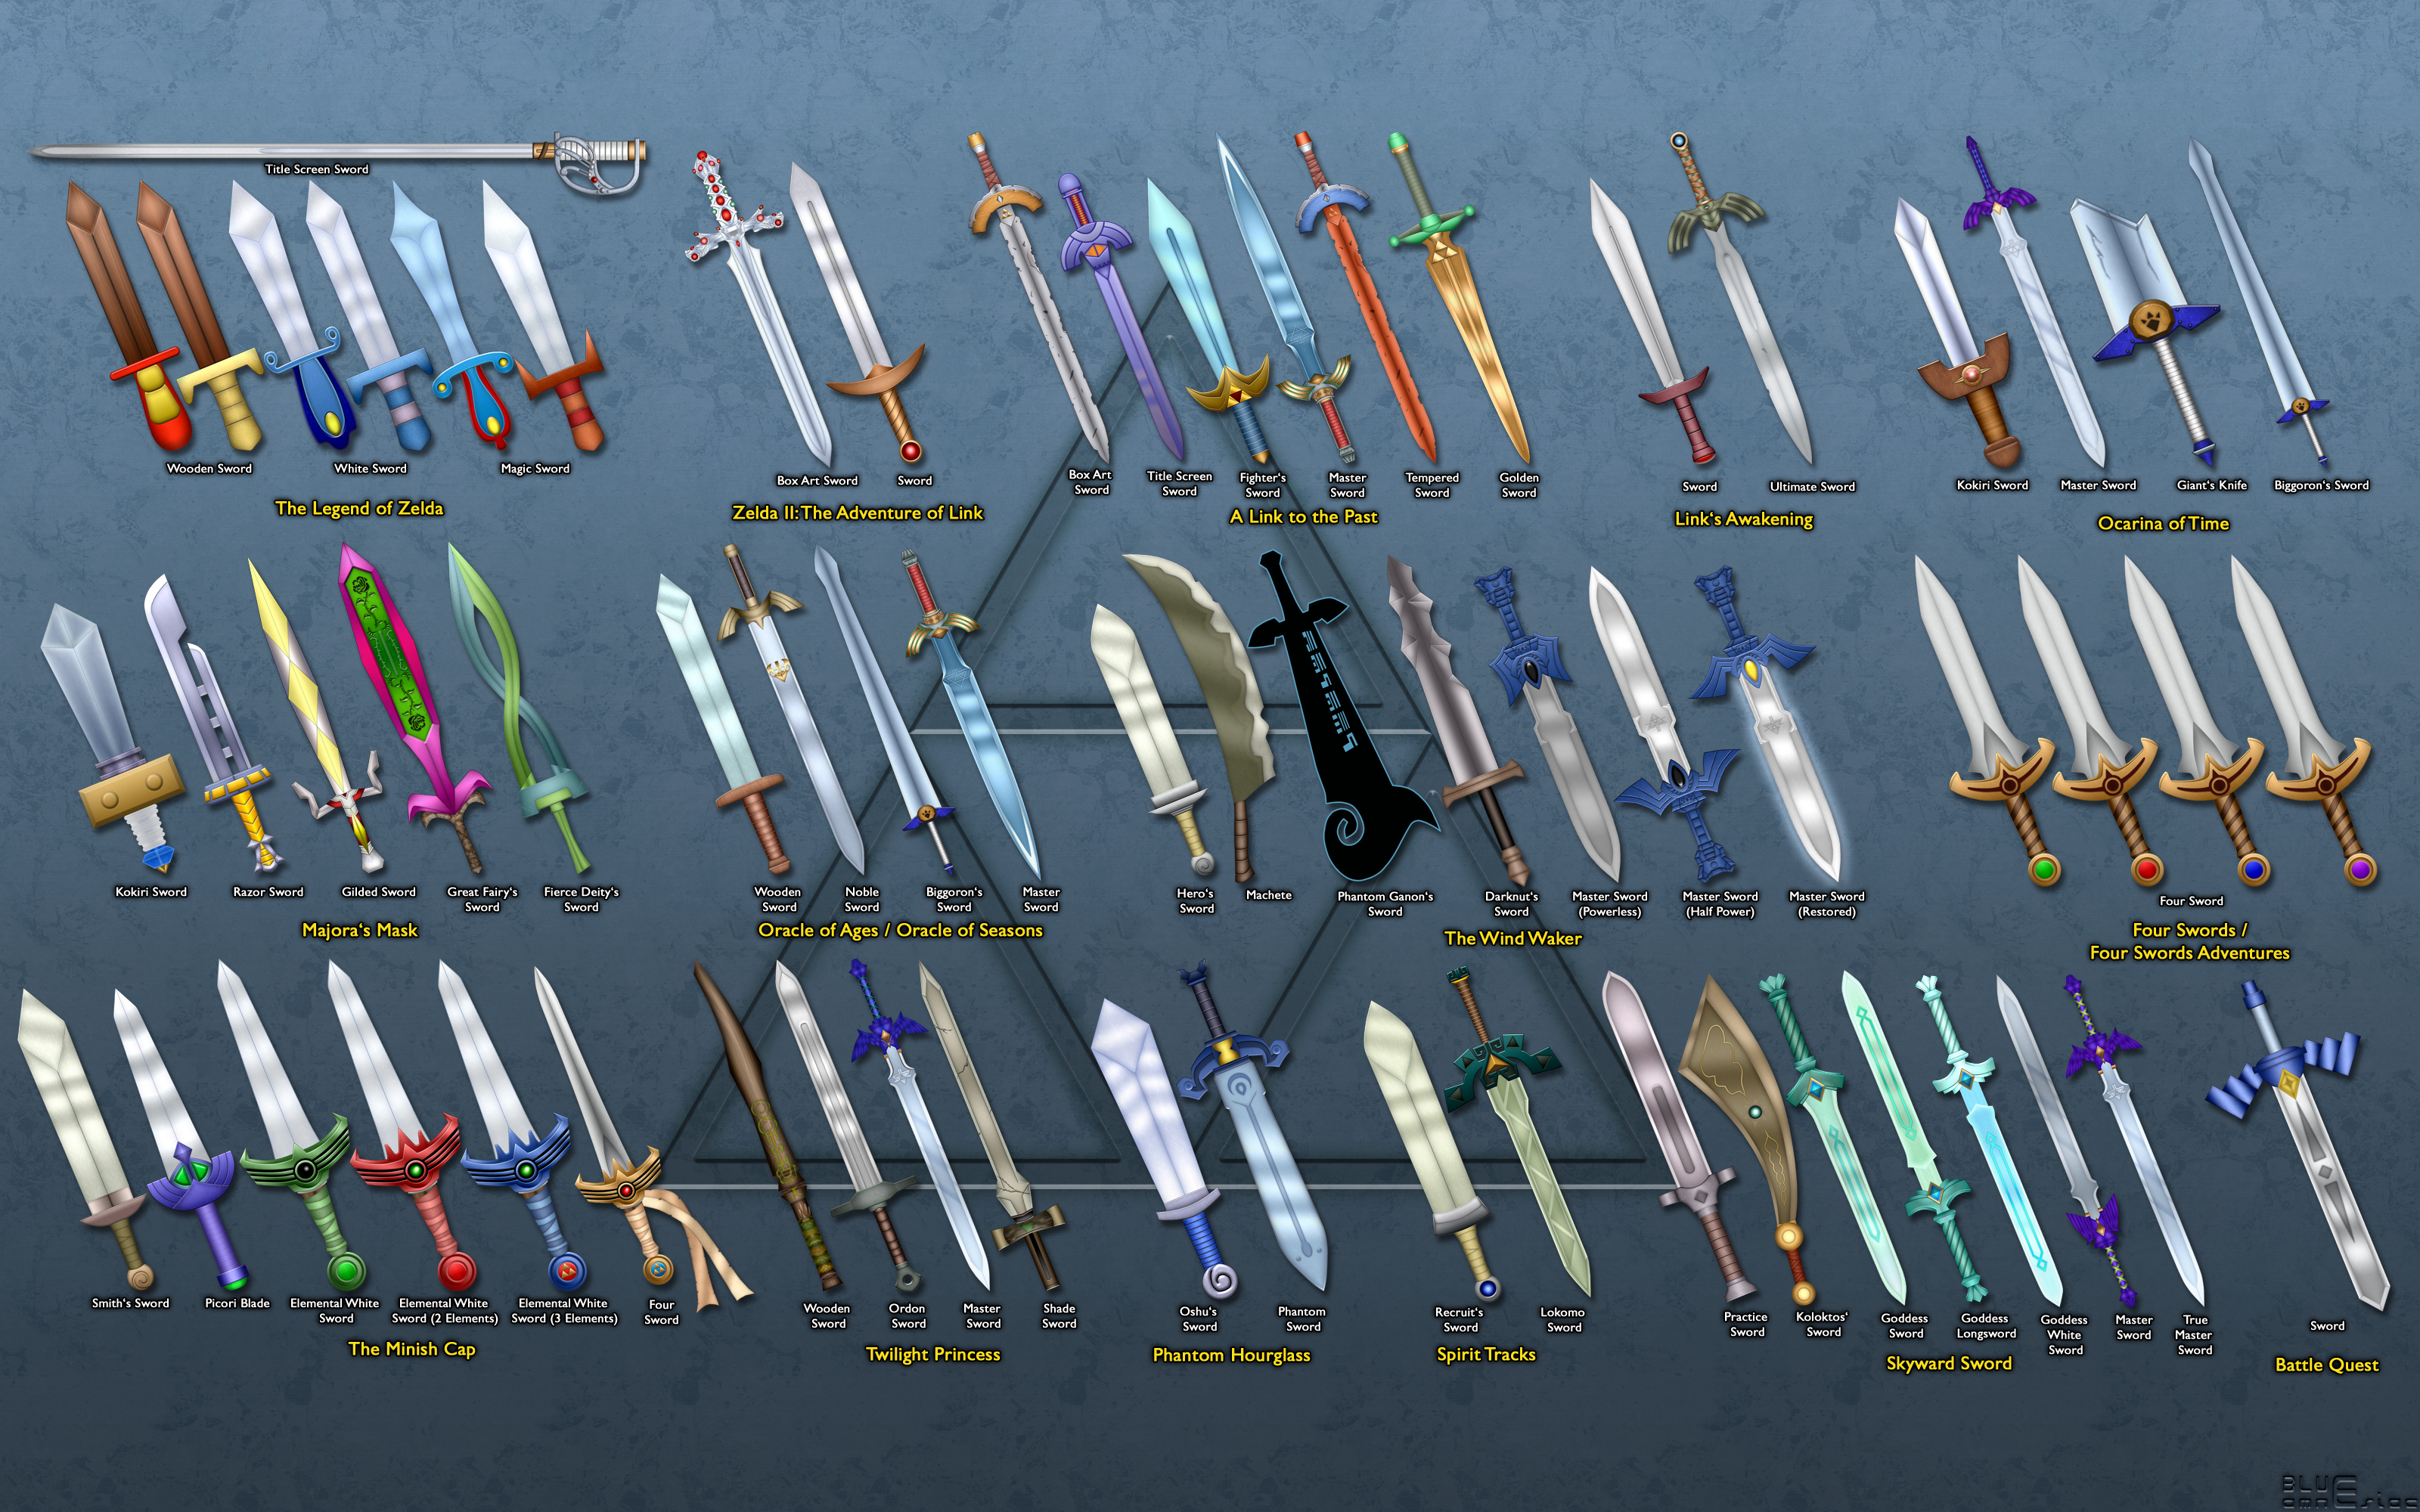 This One Here By Spongeboy1985 Uses Screenshots Of The Swords